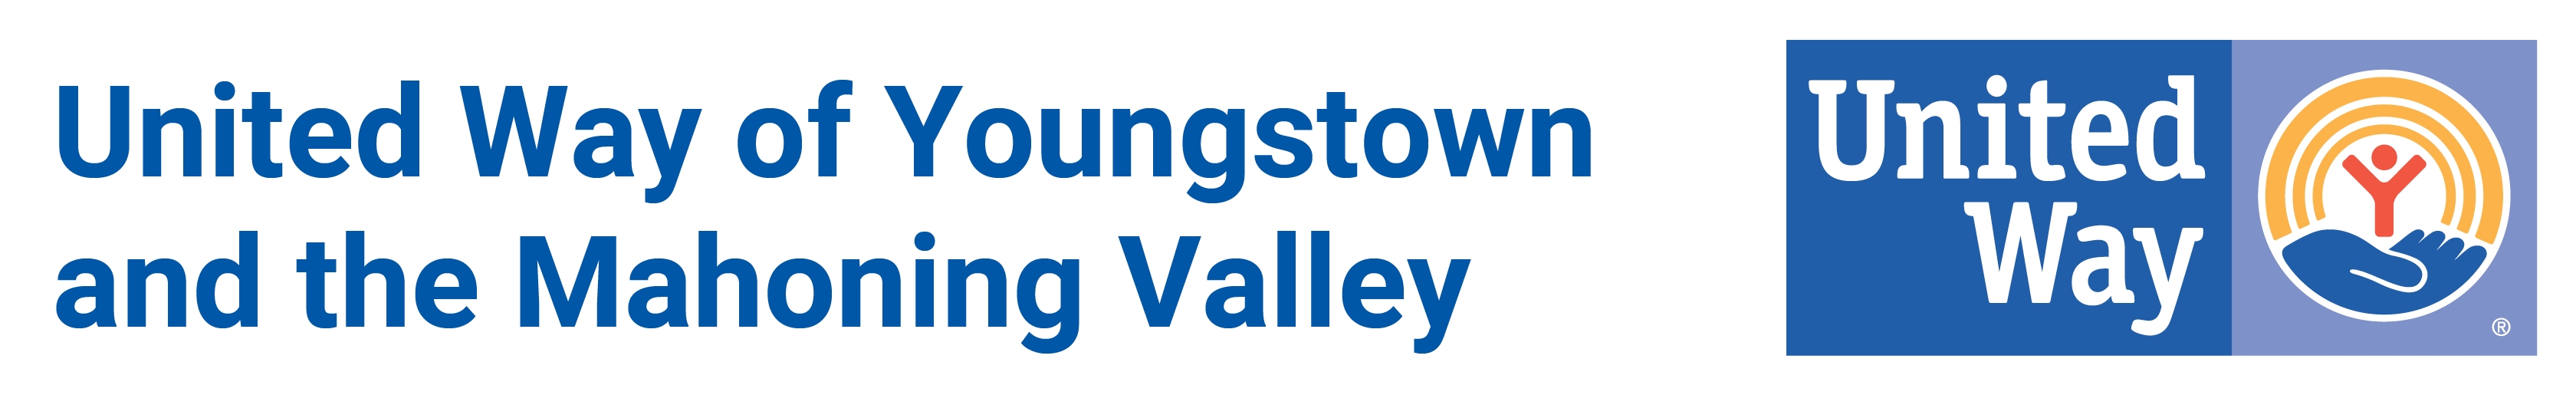 Logo of United Way of Youngstown and the Mahoning Valley